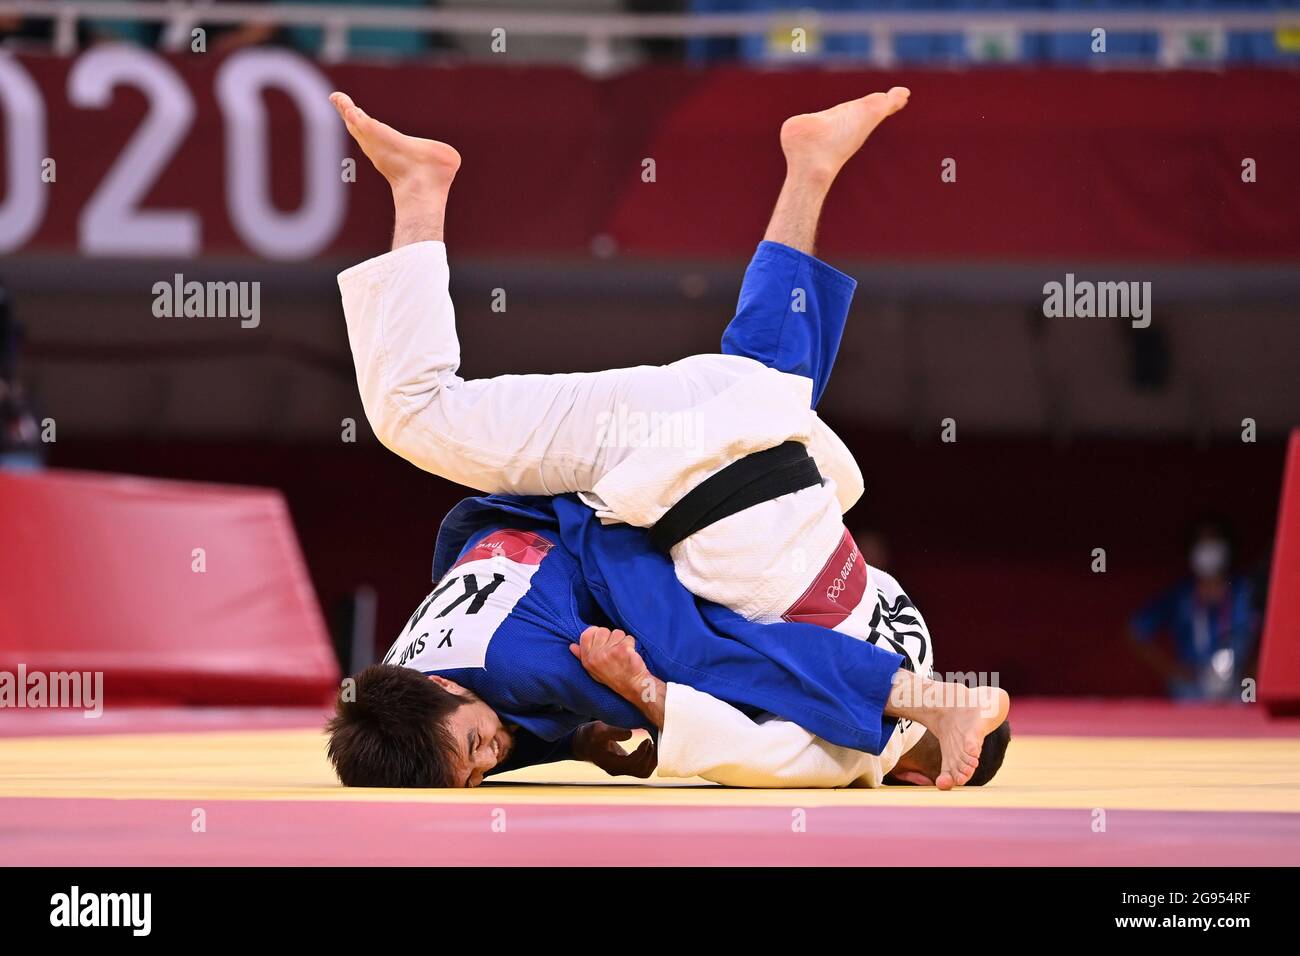 Page 13 - Judo Contest High Resolution Stock Photography and Images - Alamy